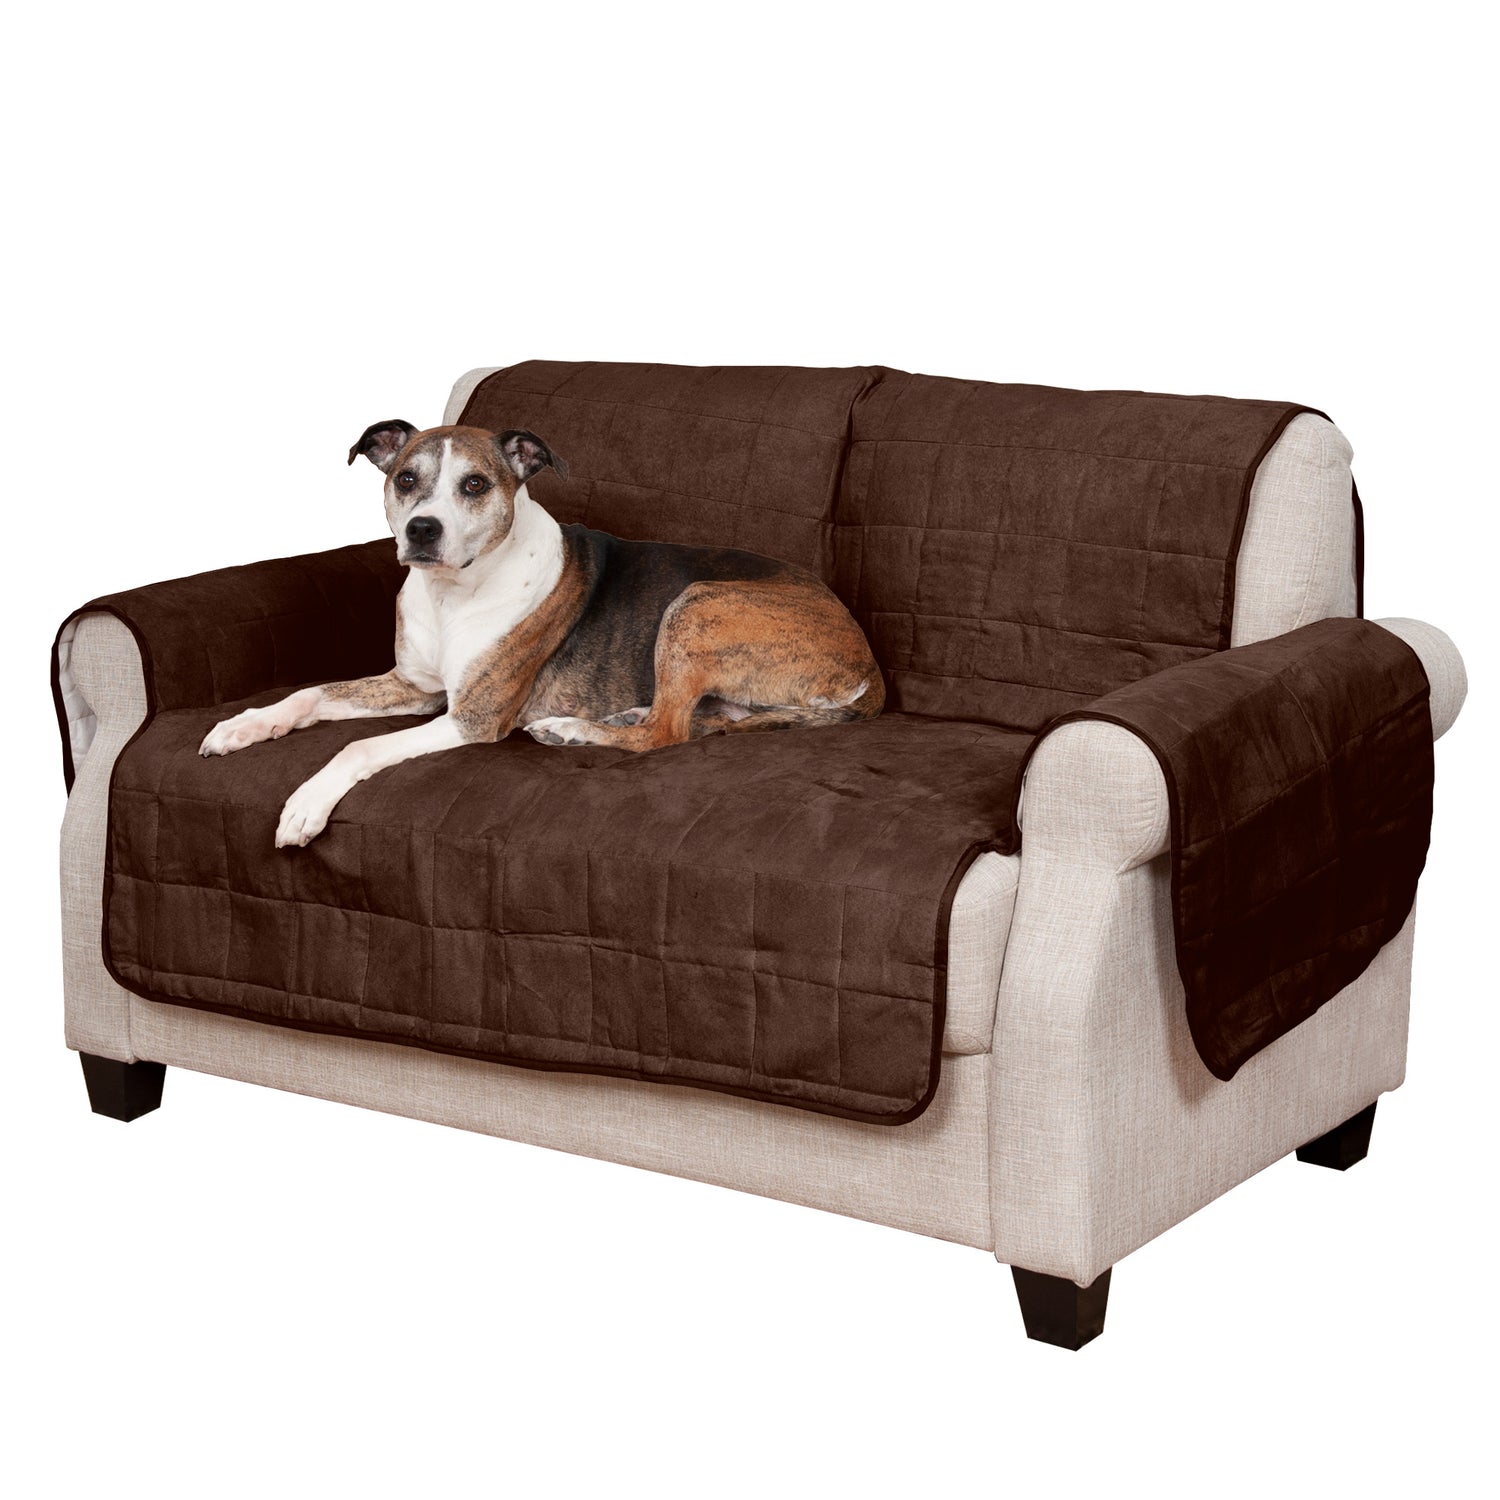 Furhaven Pet Furniture Cover | Suede Furniture Cover Protector for Dogs & Cats, Clay, Loveseat Animals & Pet Supplies > Pet Supplies > Cat Supplies > Cat Furniture FurHaven Pet Products Loveseat Brown 